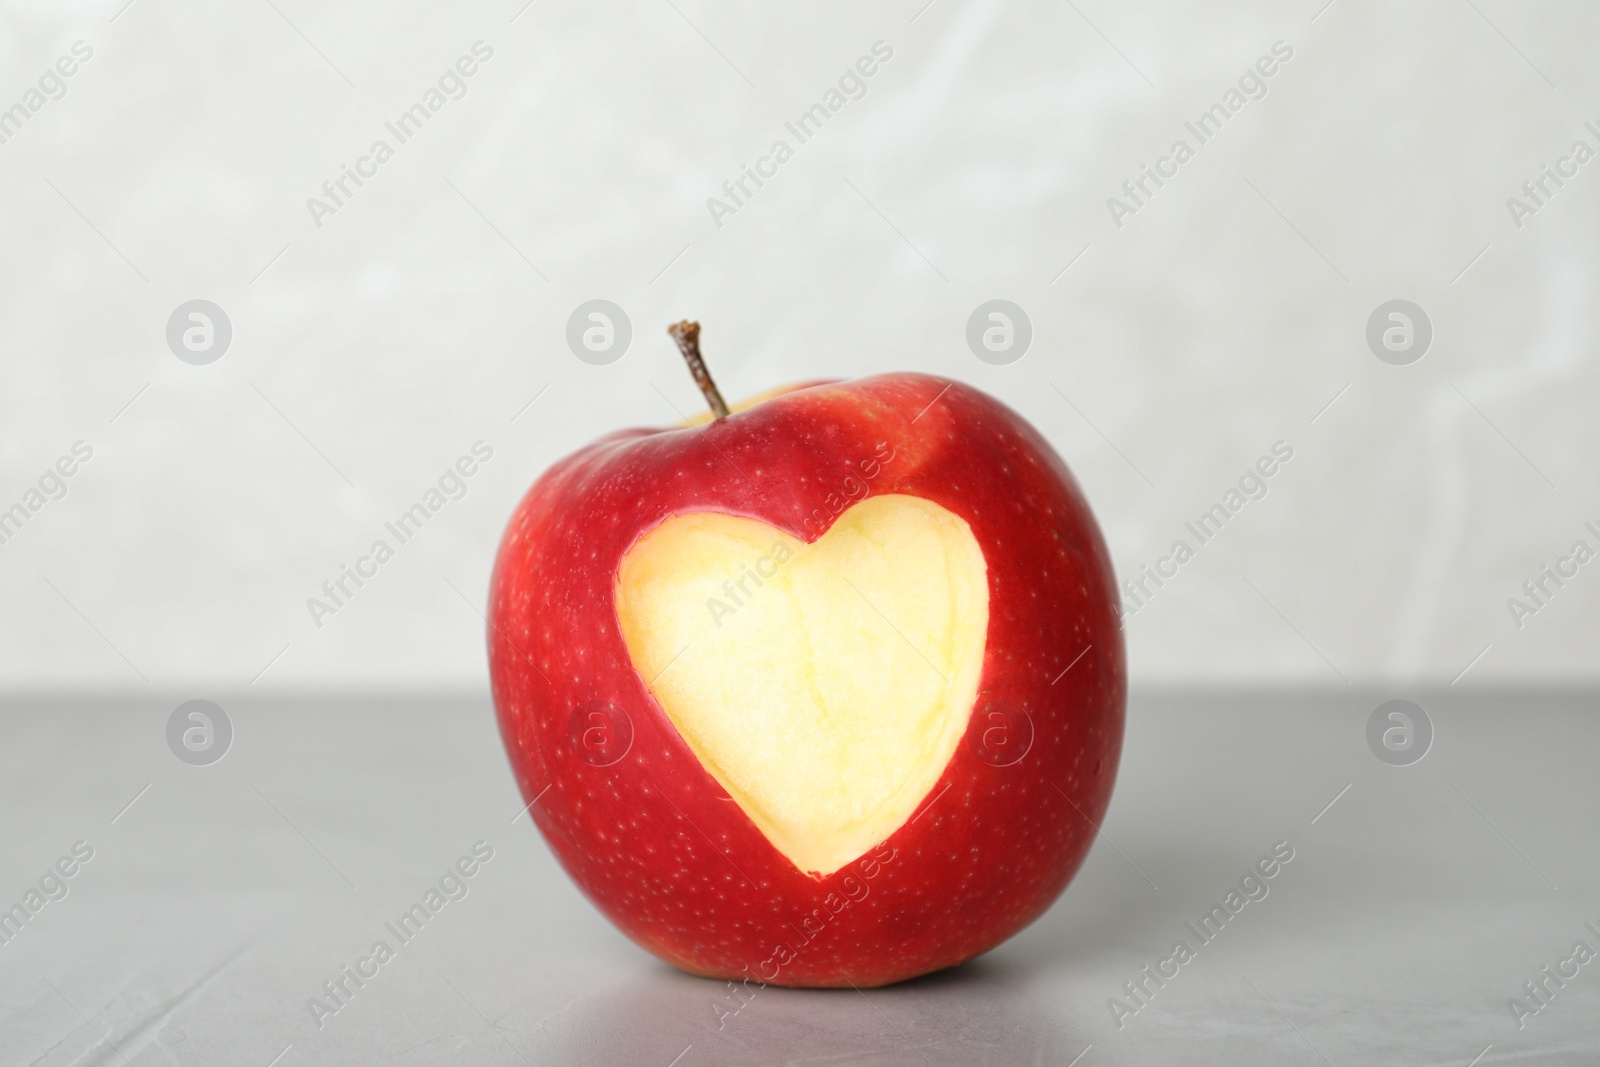 Photo of Red apple with carved heart on table against light background